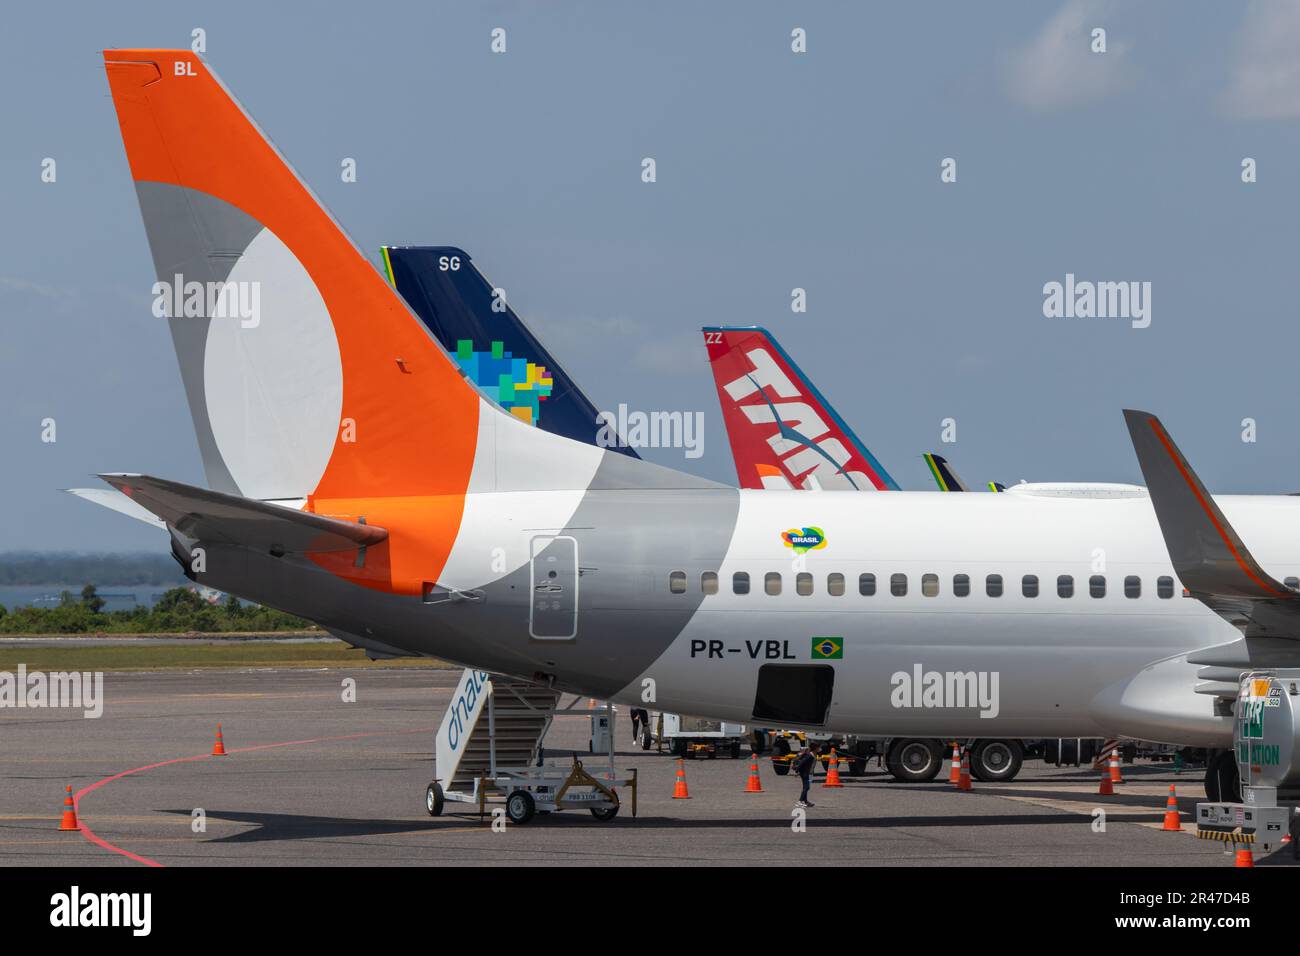 Tails of TAM (LATAM), GOL, and AZUL aircraft. Brazil's three largest airlines. At Santarem Airport (SBSN) Stock Photo